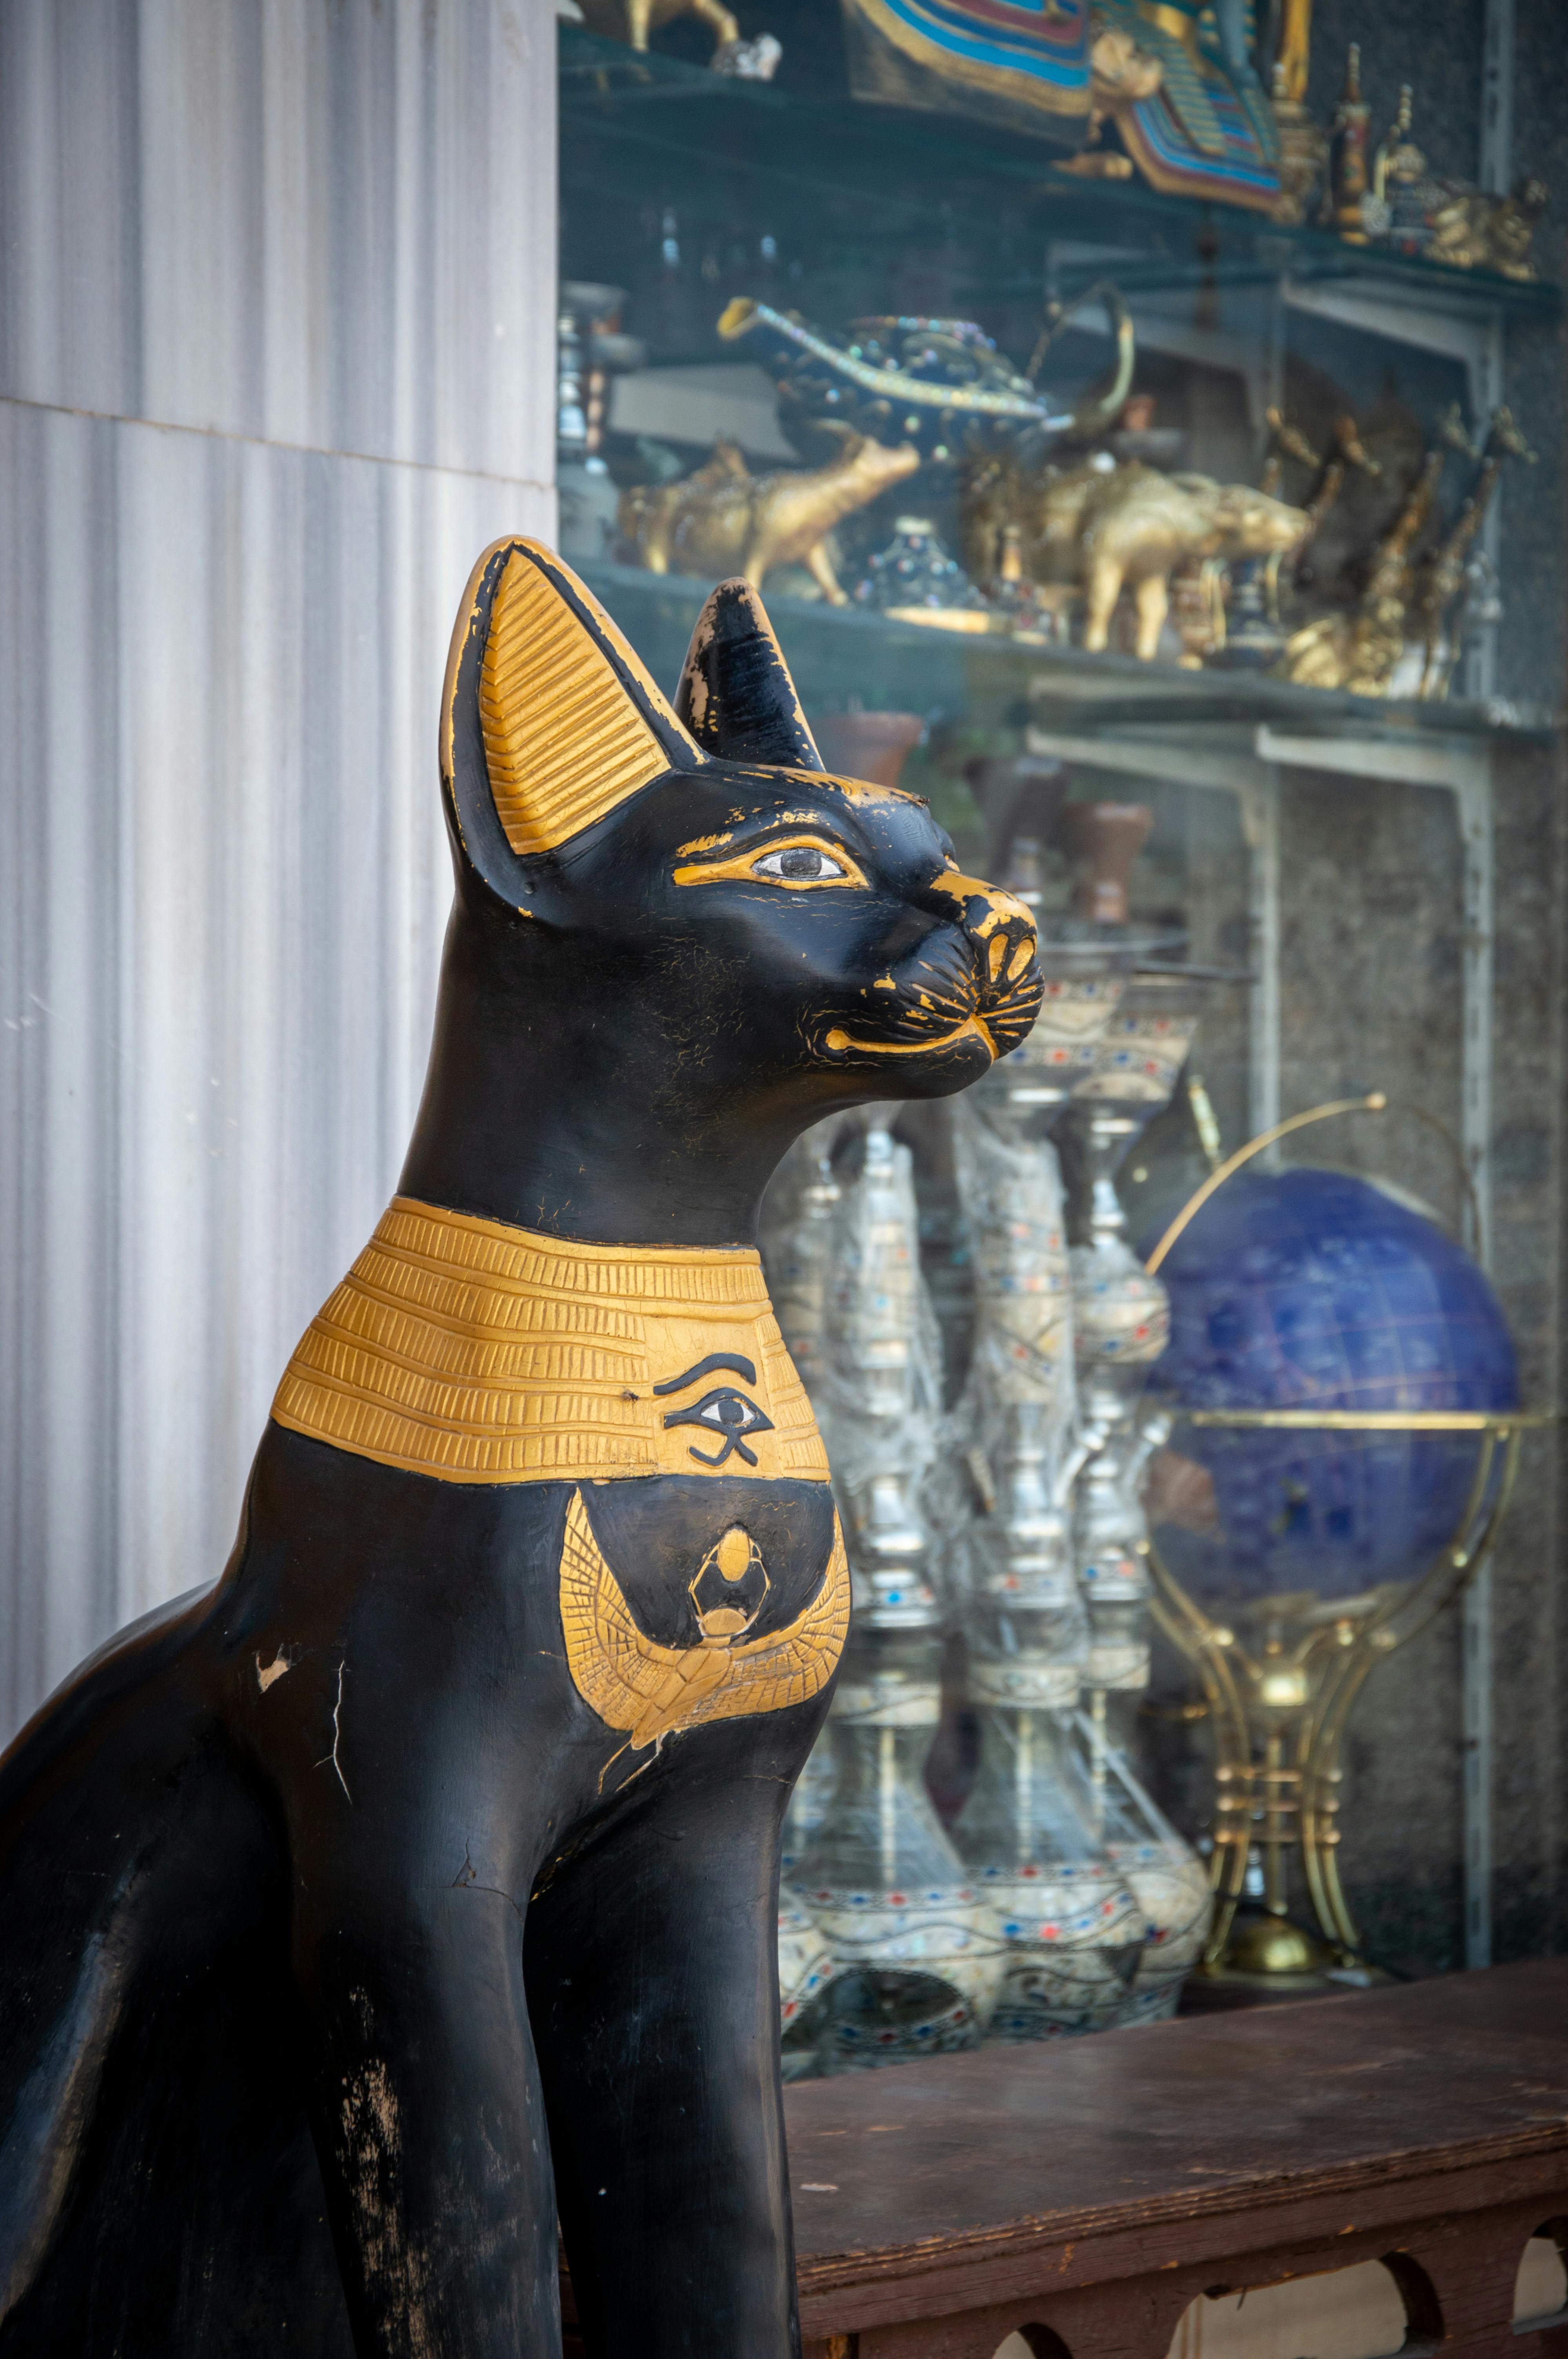 Egyptian Cat Figurine in an Antique Store · Free Stock Photo